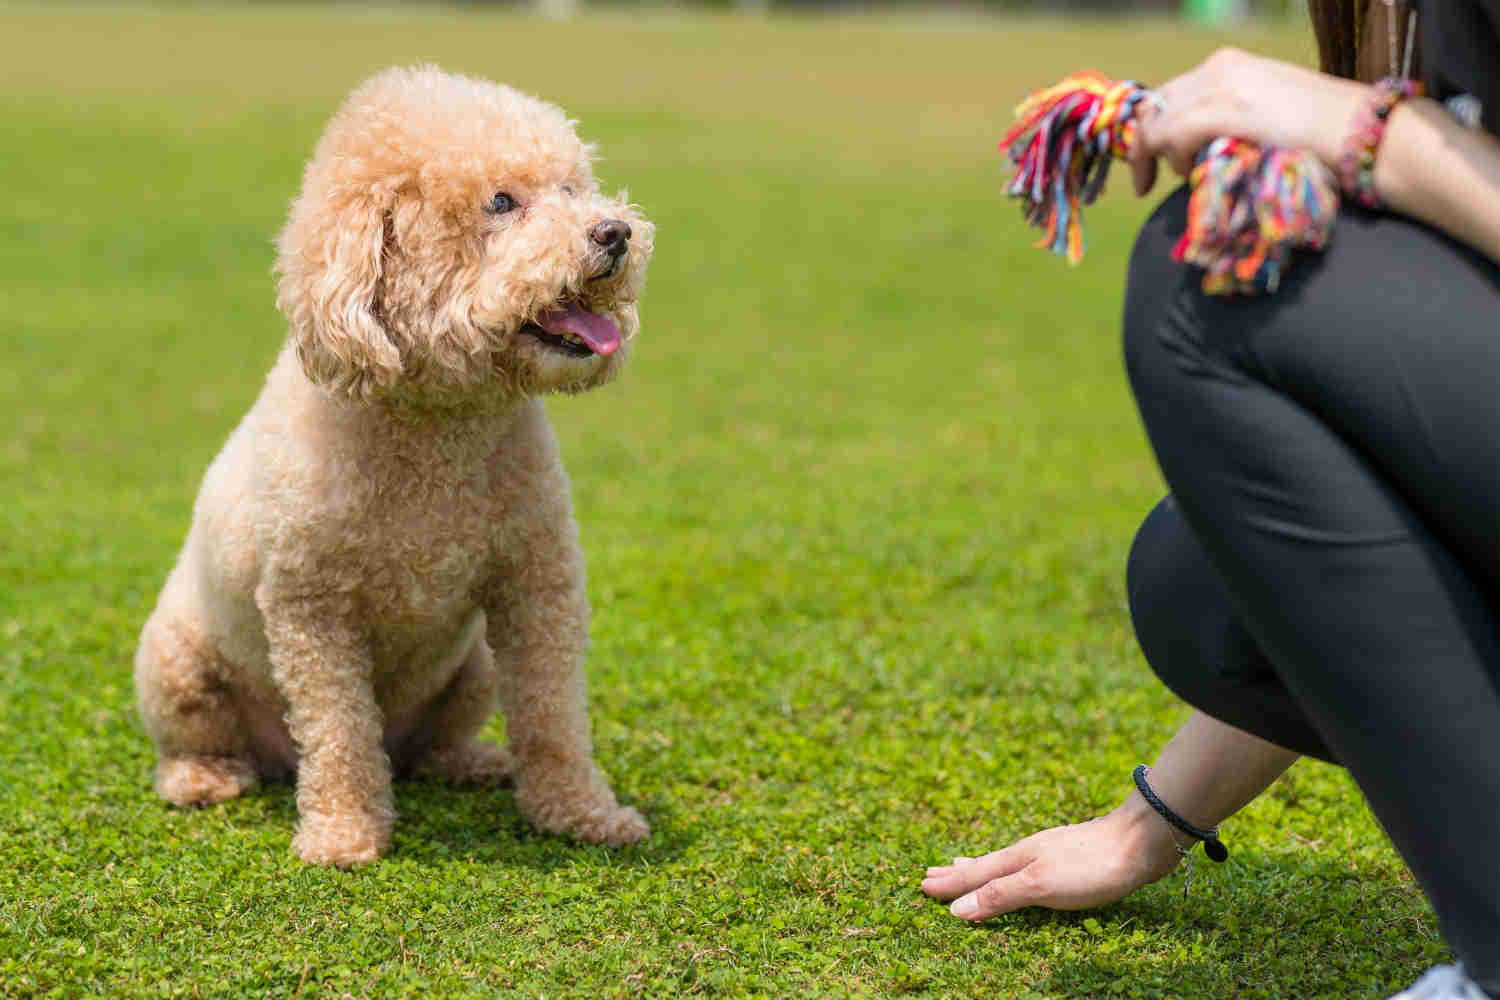 What are the most important things to consider before bringing a Poodle puppy home?